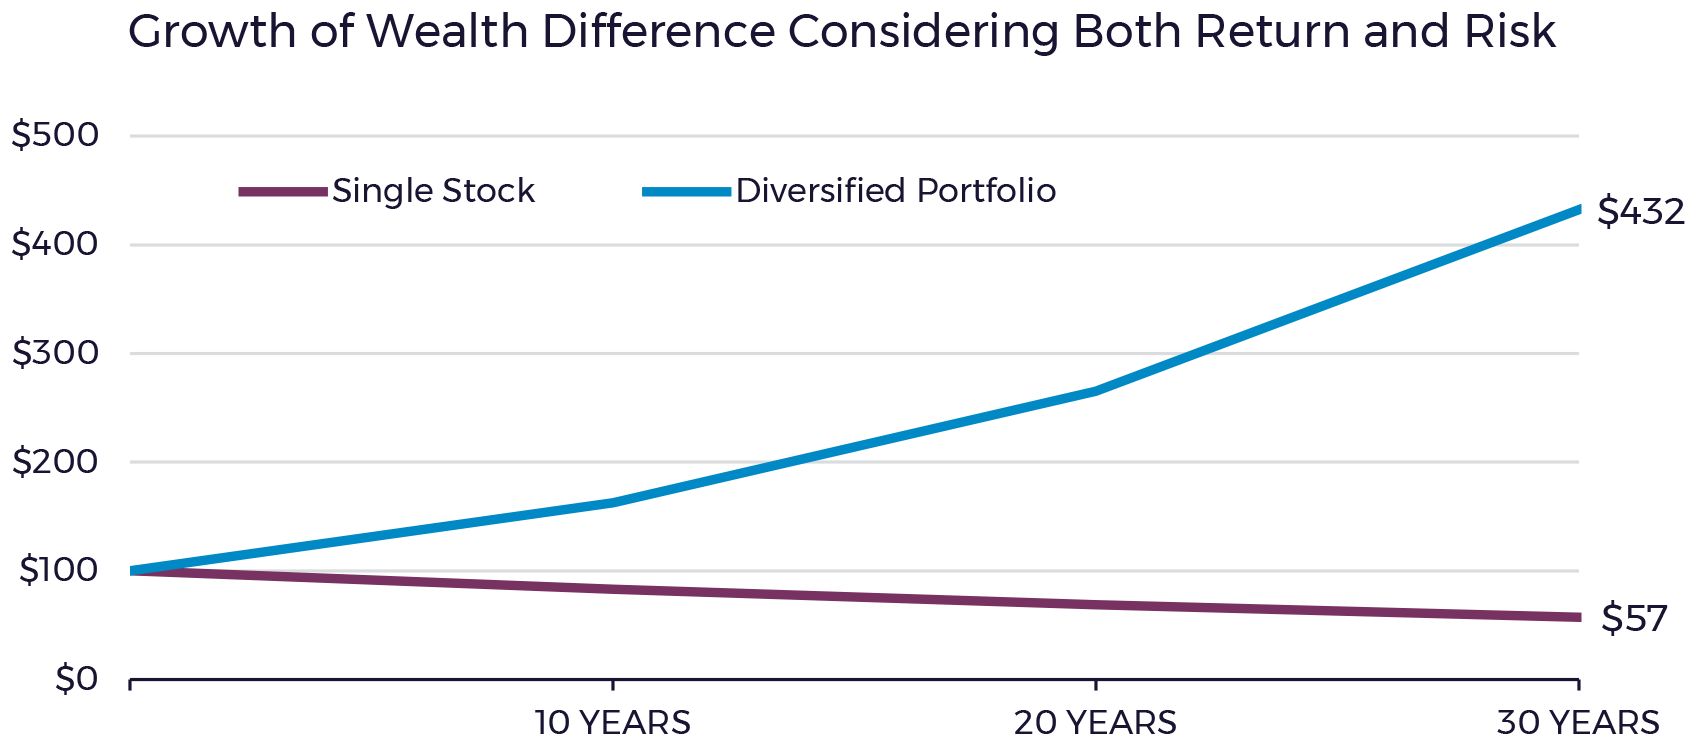 Growth of Wealth Difference Considering Both Return and Risk